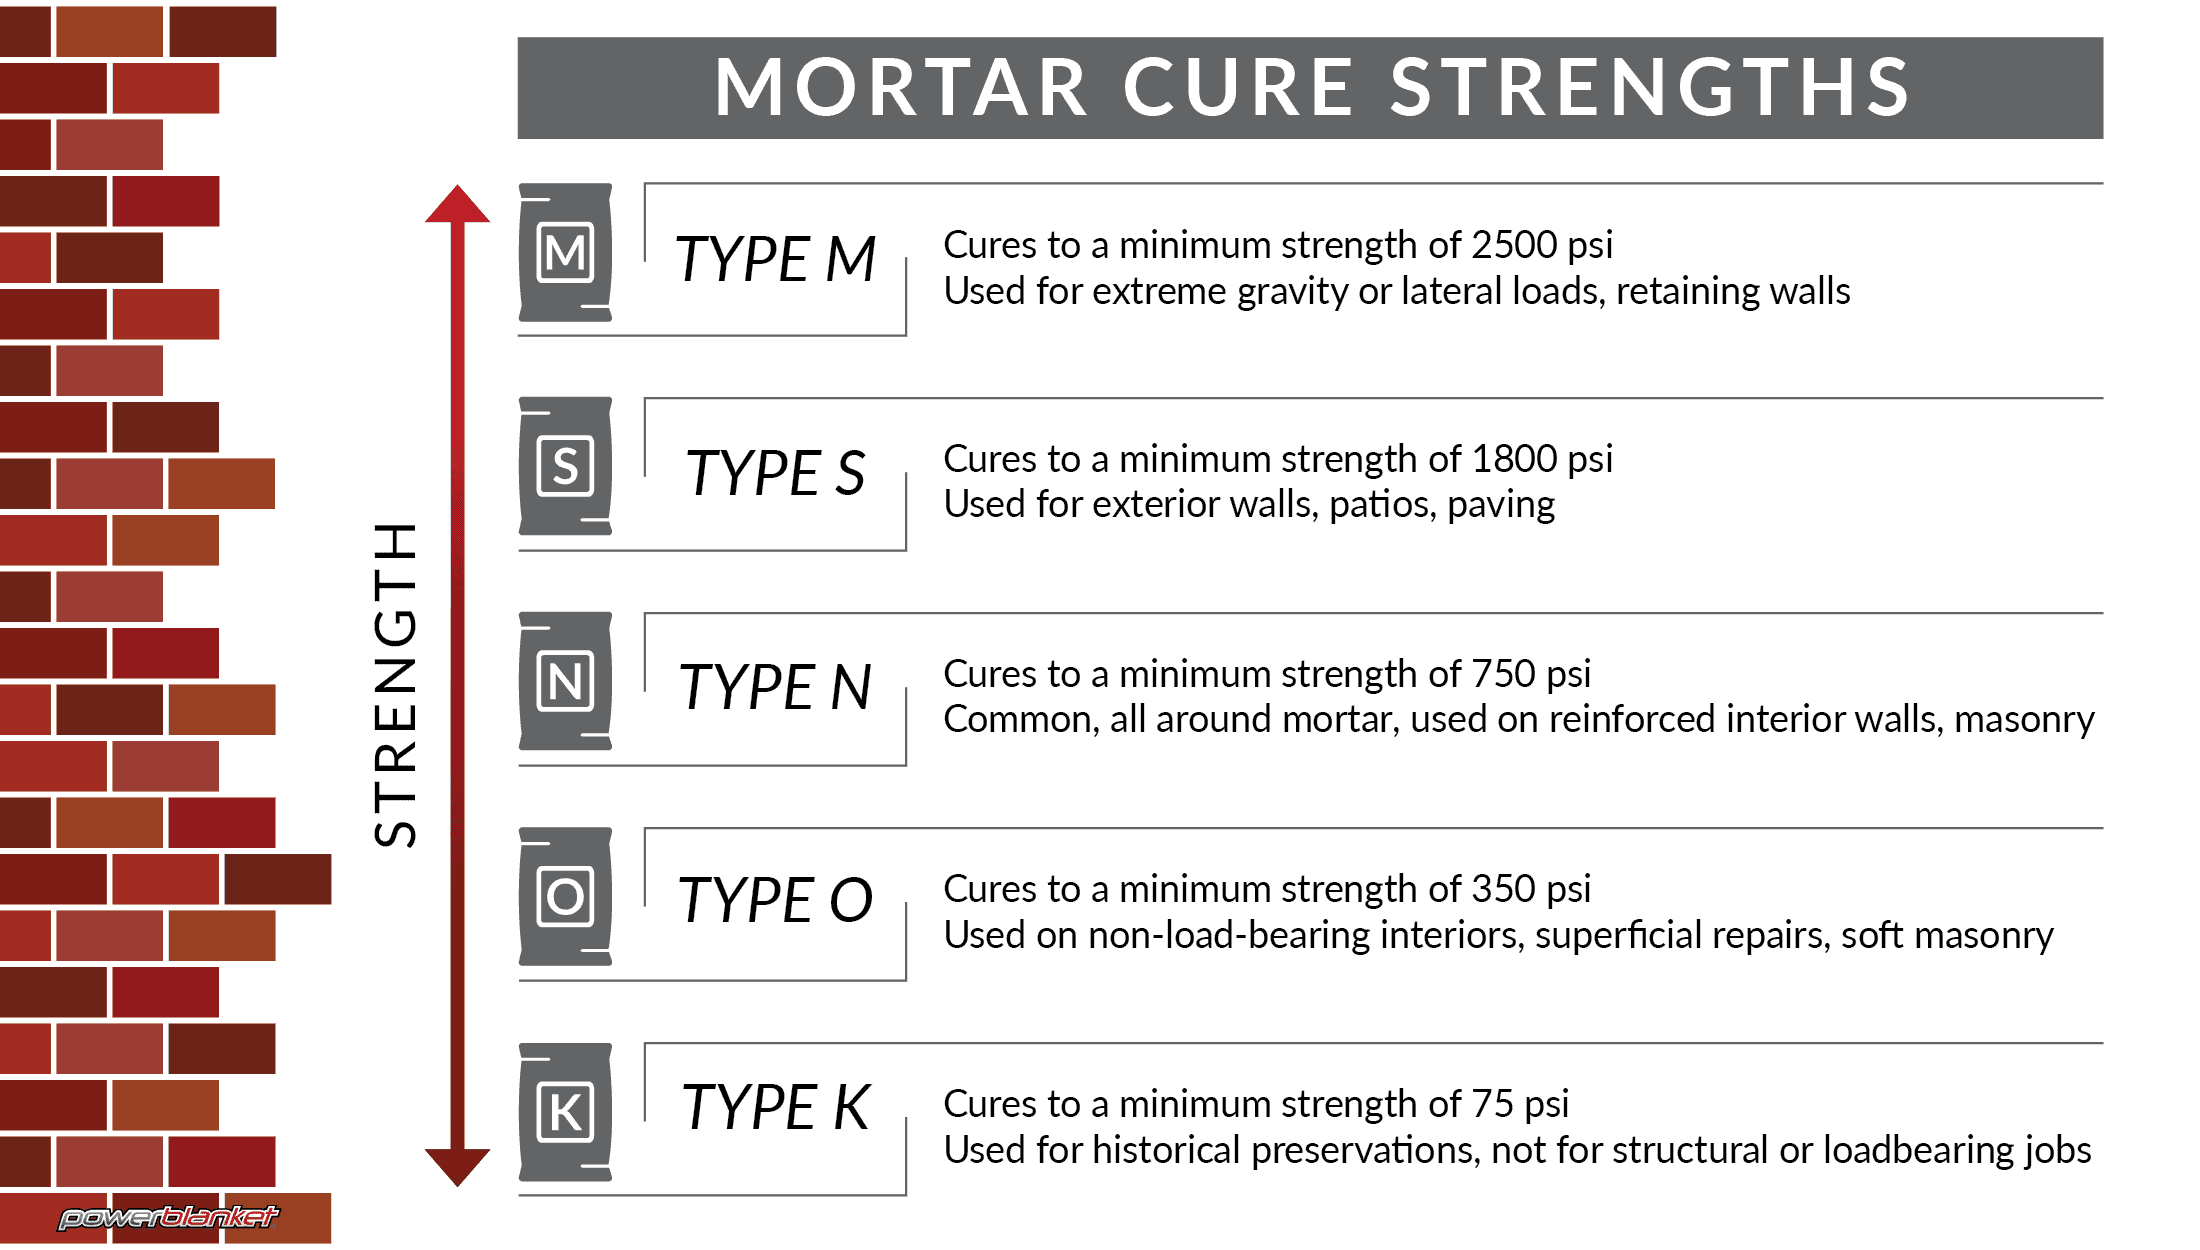 Powerblanket infographic on mortar curing time